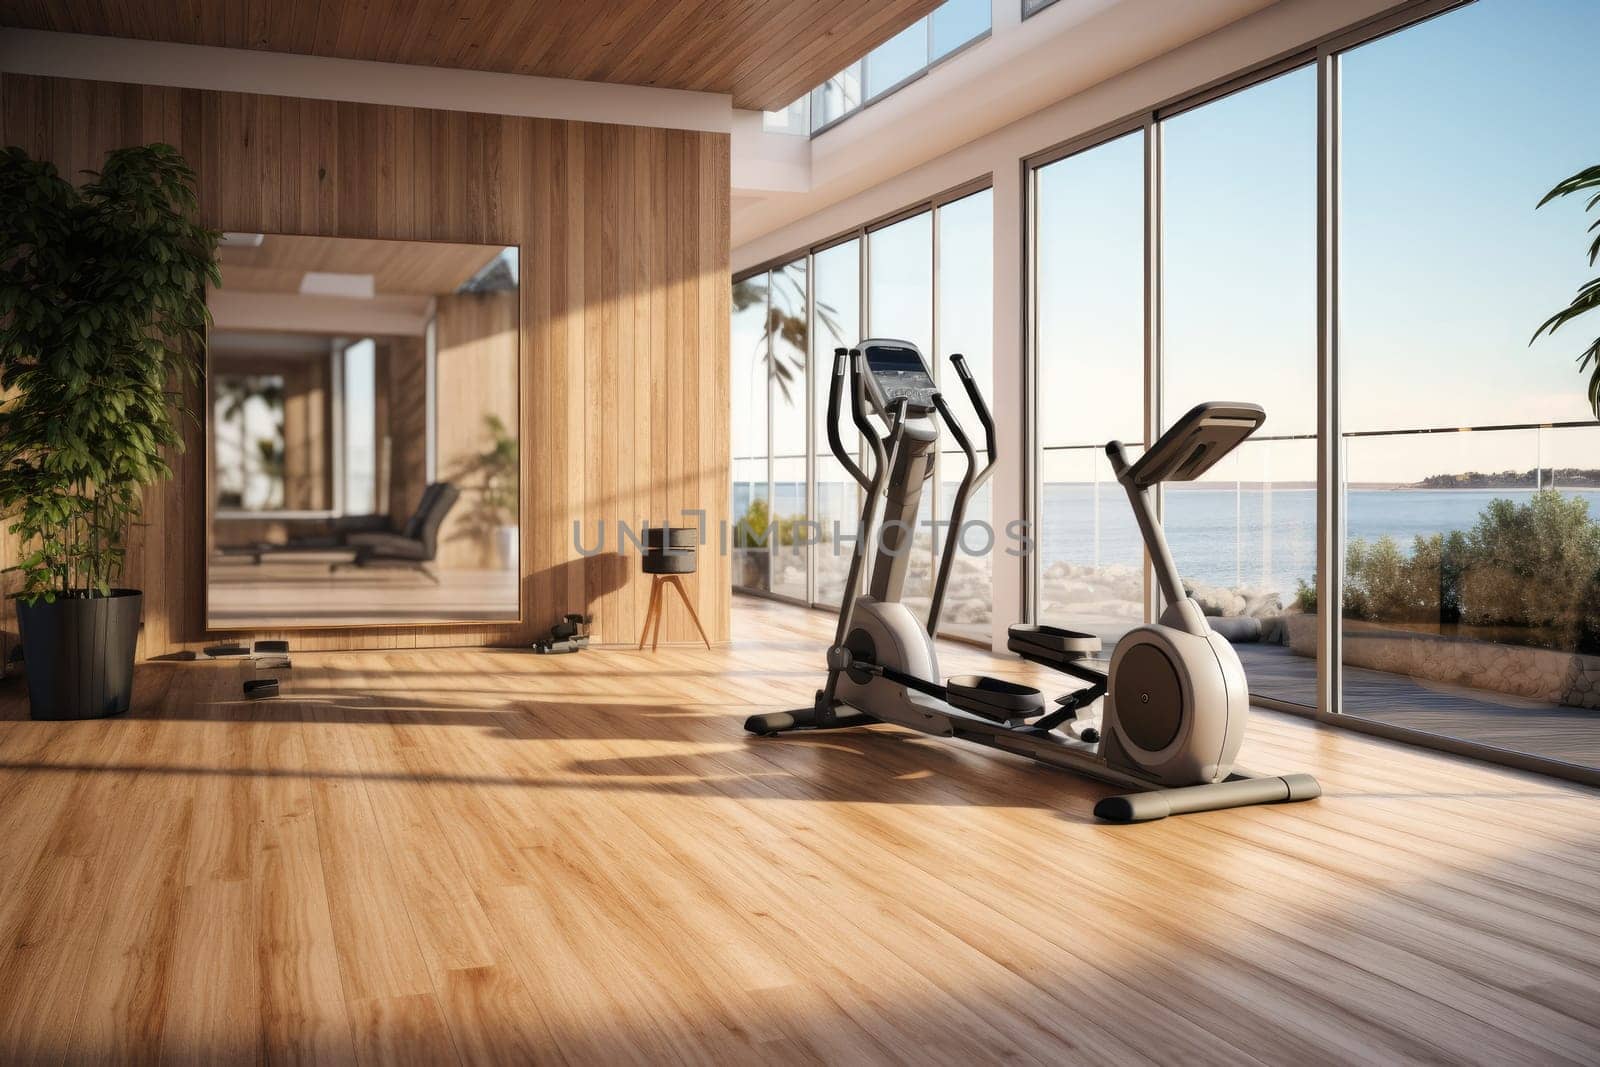 Modern Home Gym Area with Exercise Machine for Sports Workouts by Yurich32